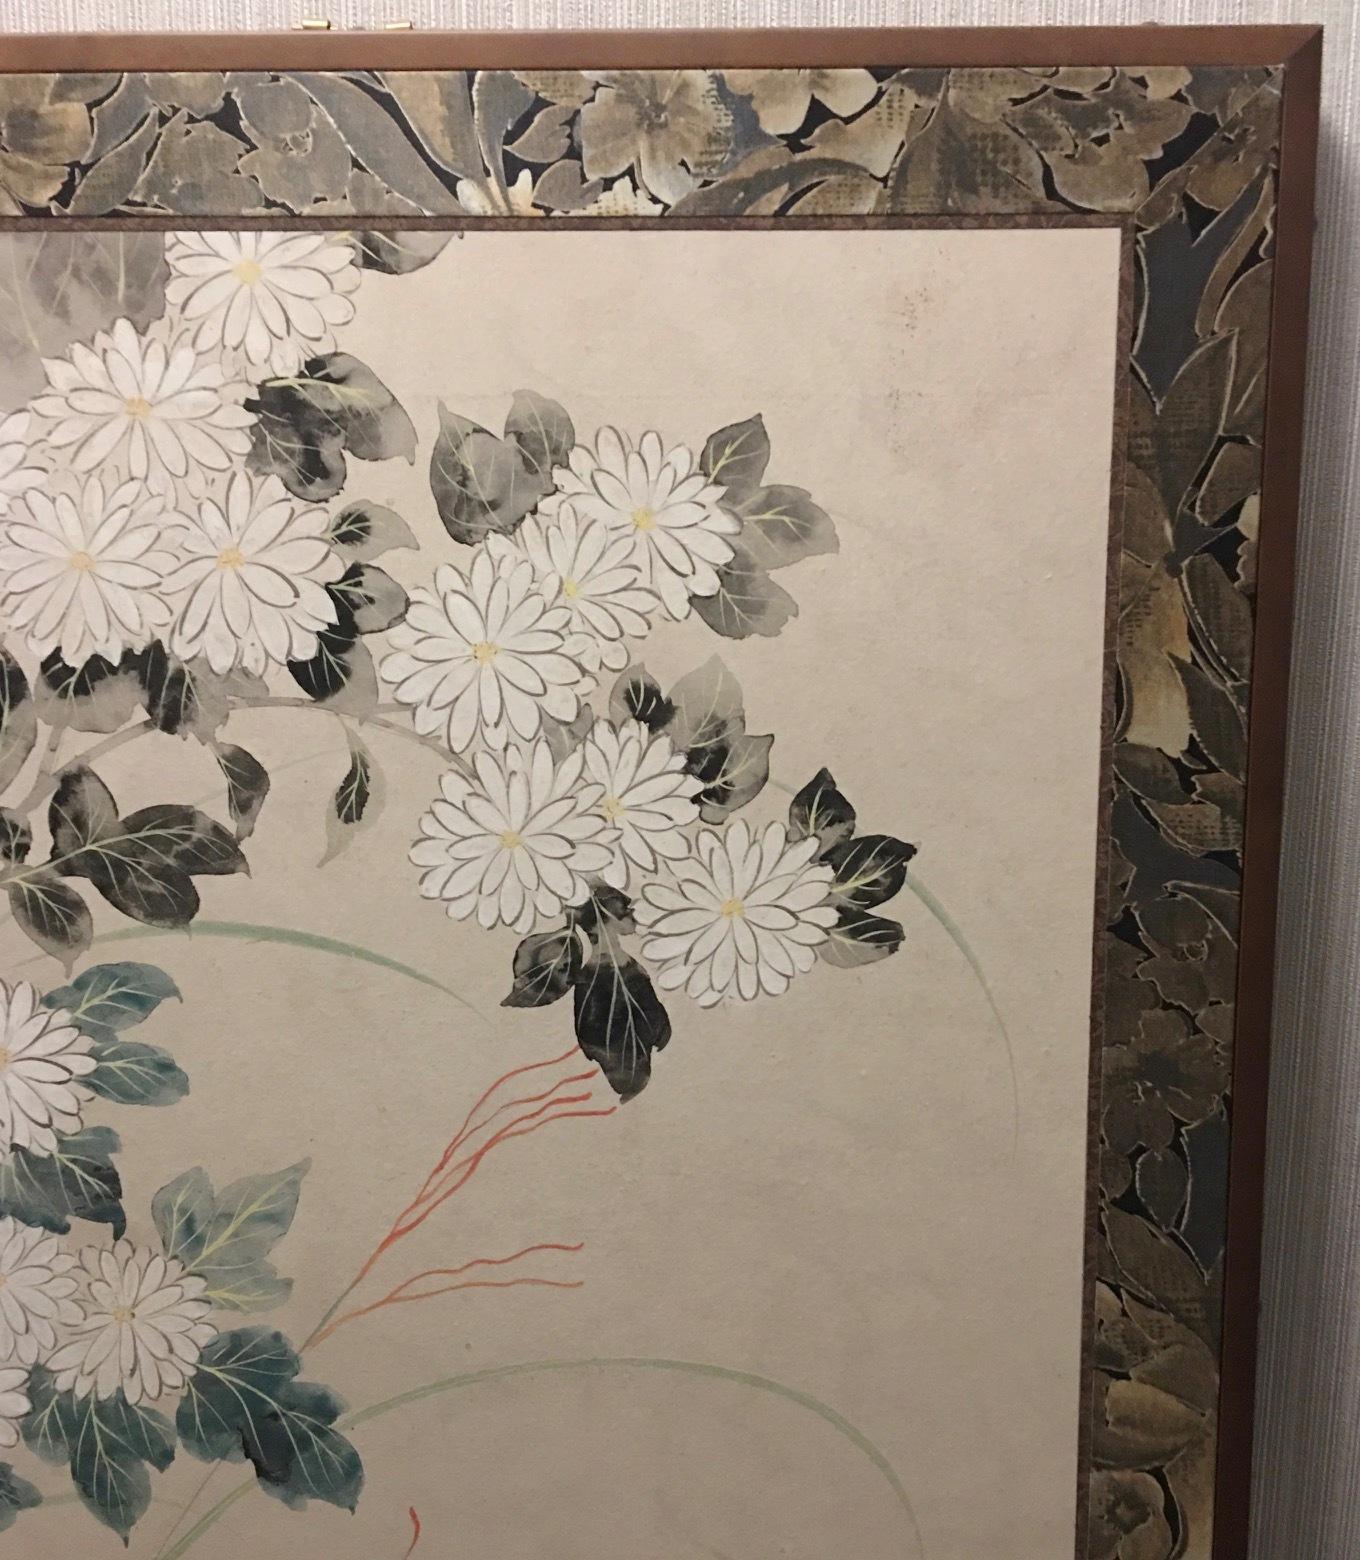 Japanese Meiji/Taisho period two panel folding screen richly painted on Mulberry paper and depicting chrysanthemums and morning glories on a ivory background. The piece is framed by fine brocade and mounted on a black lacquered frame. Made in Japan